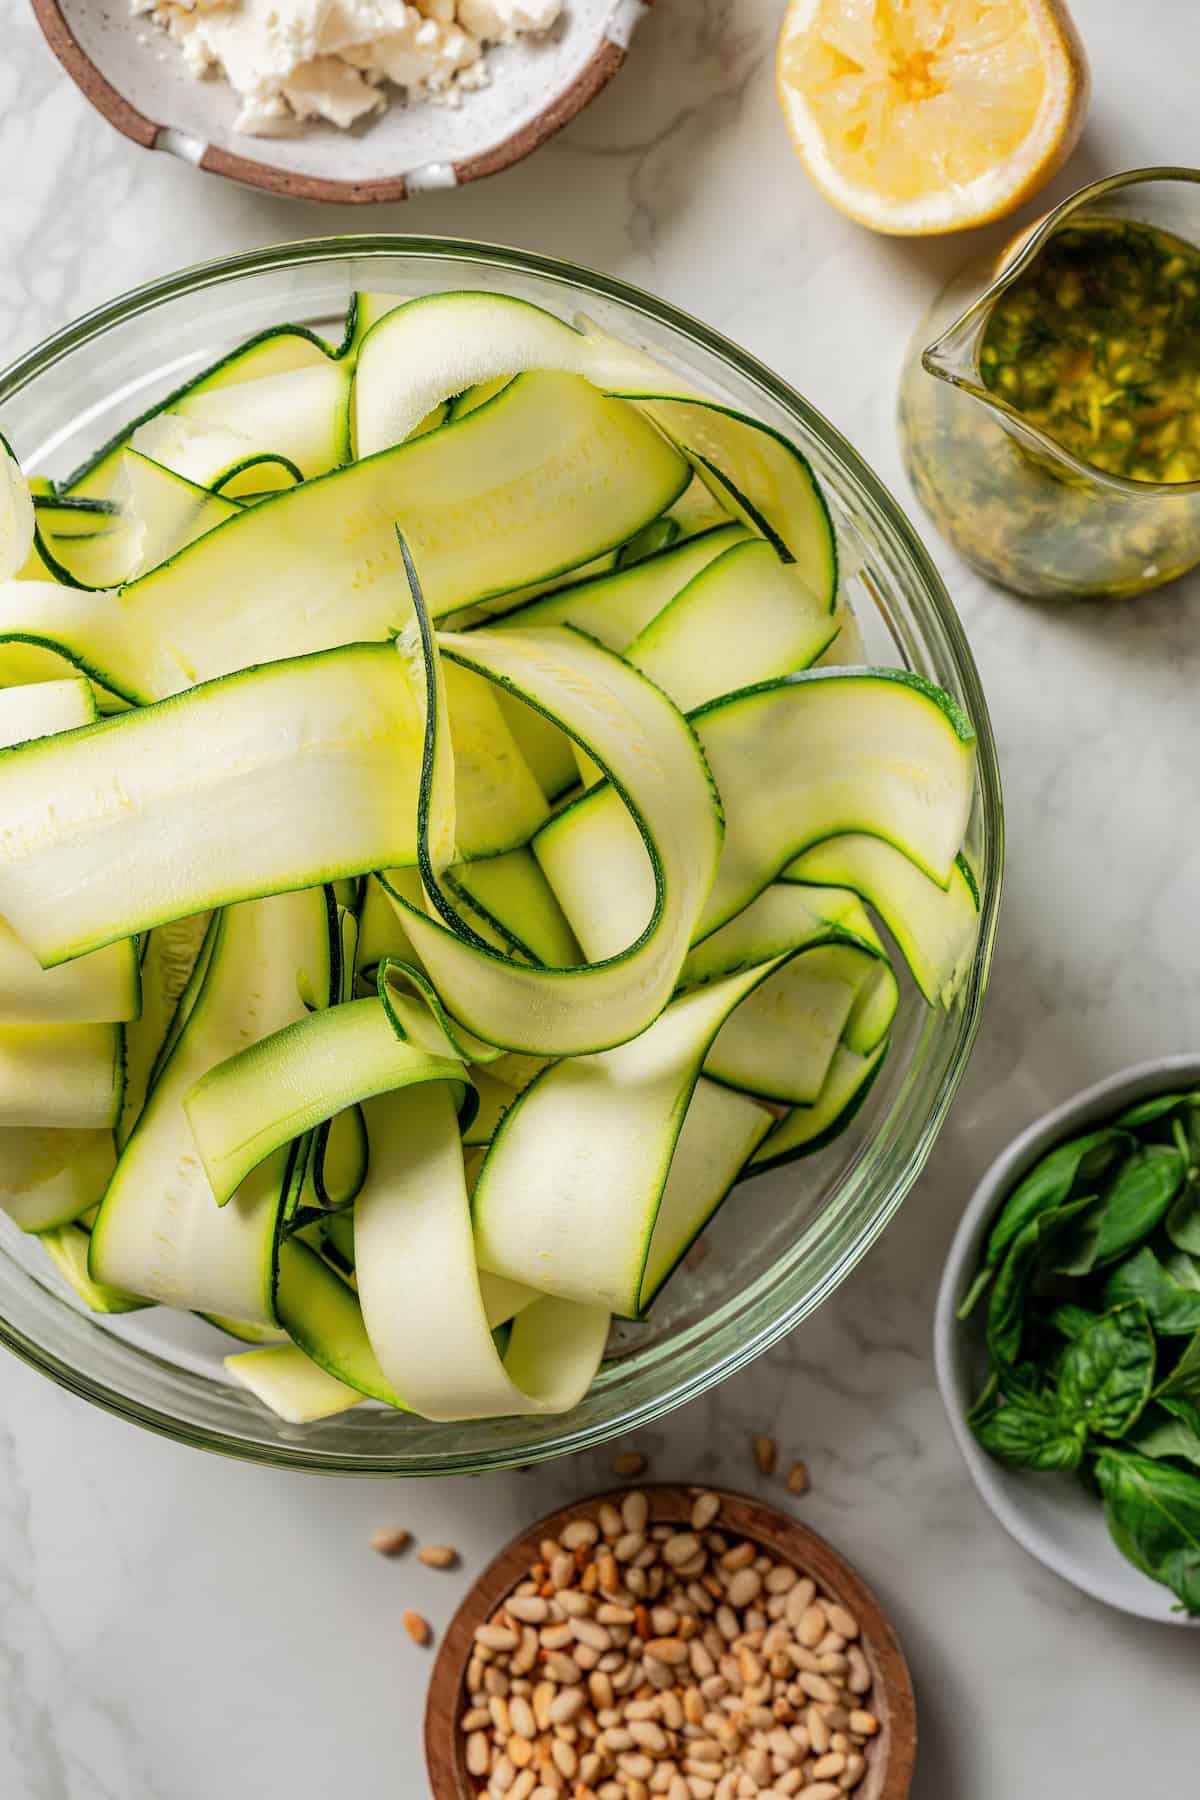 Zucchini ribbons in a glass bowl surrounded by smaller bowls filled with salad ingredients.